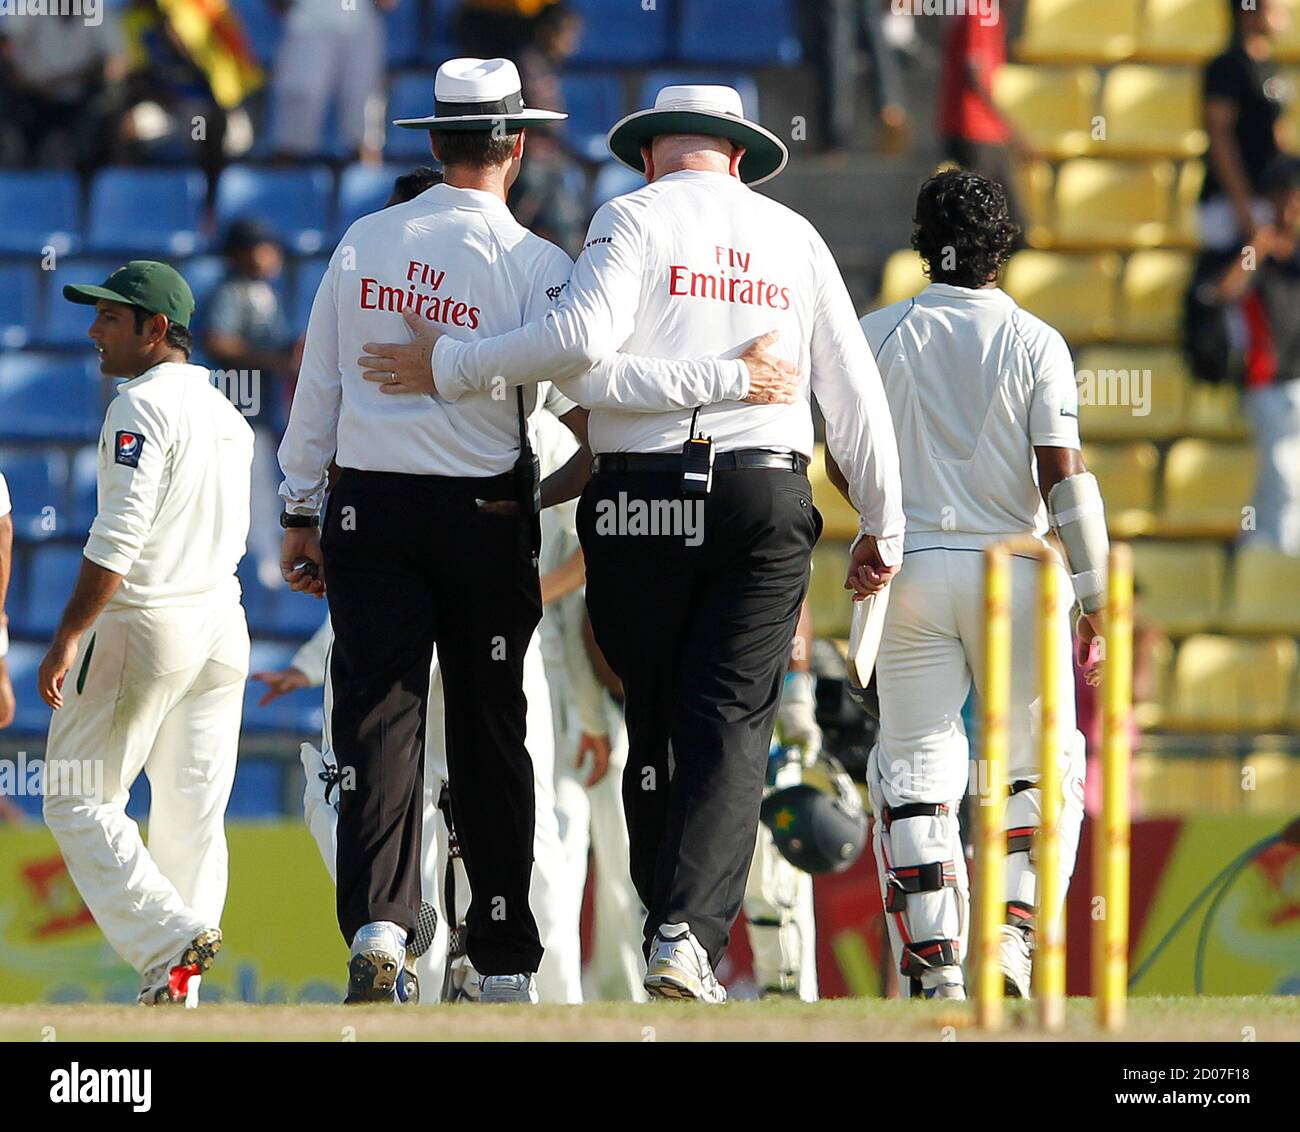 Umpires Simon Taufel (L) and Stephen Davis (R) walks off the field at the end of the final test match between Sri Lanka and Pakistan, in Pallekele July 12, 2012. REUTERS/Dinuka Liyanawatte (SRI LANKA - Tags: SPORT CRICKET) Stock Photo